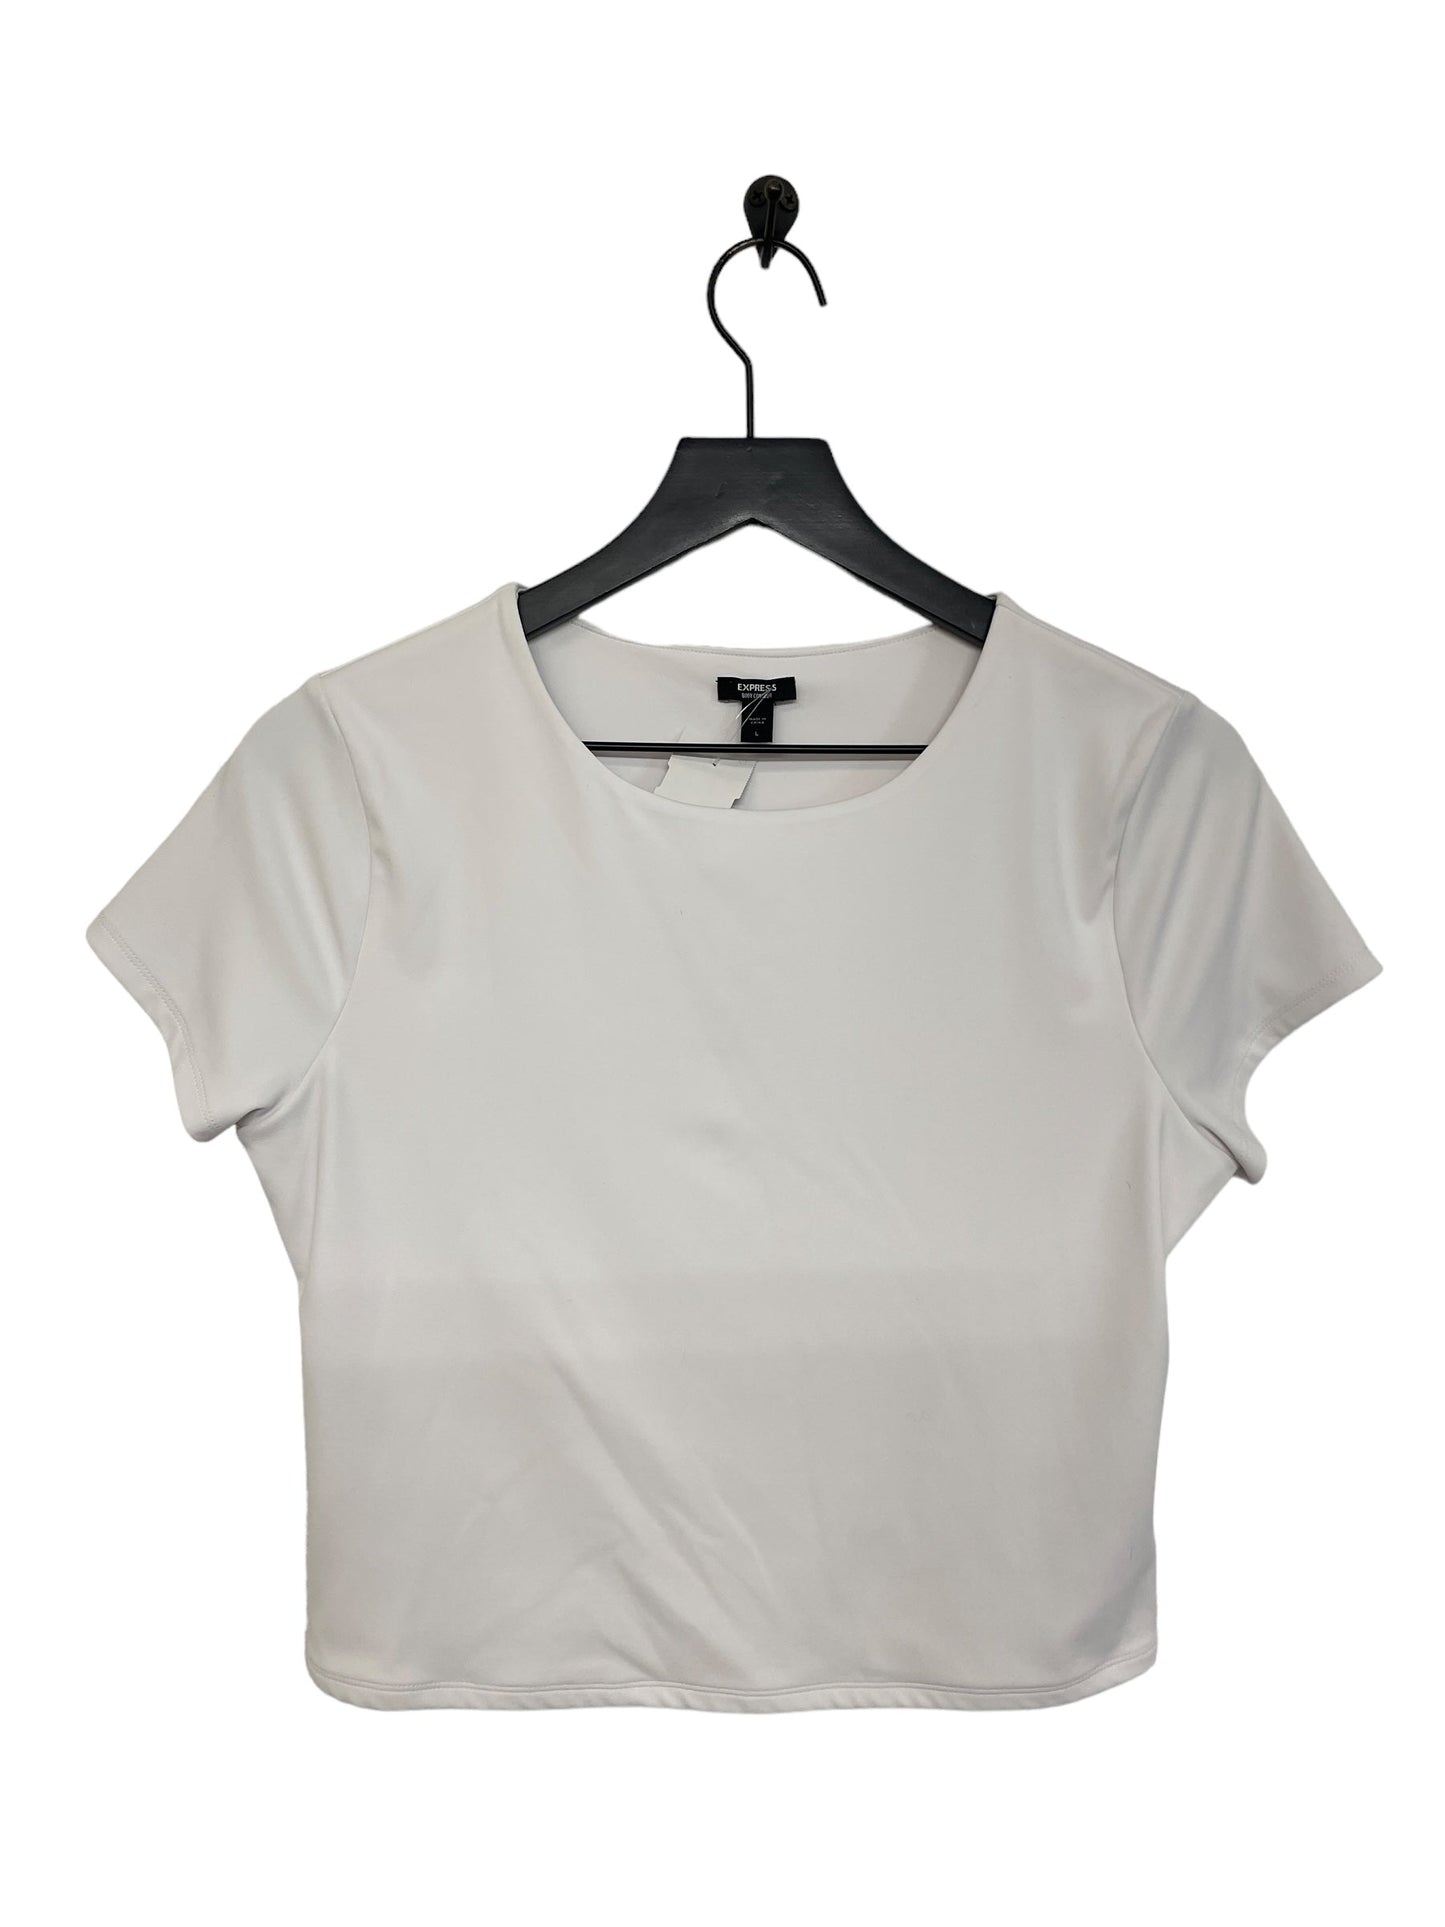 White Top Short Sleeve Express, Size L